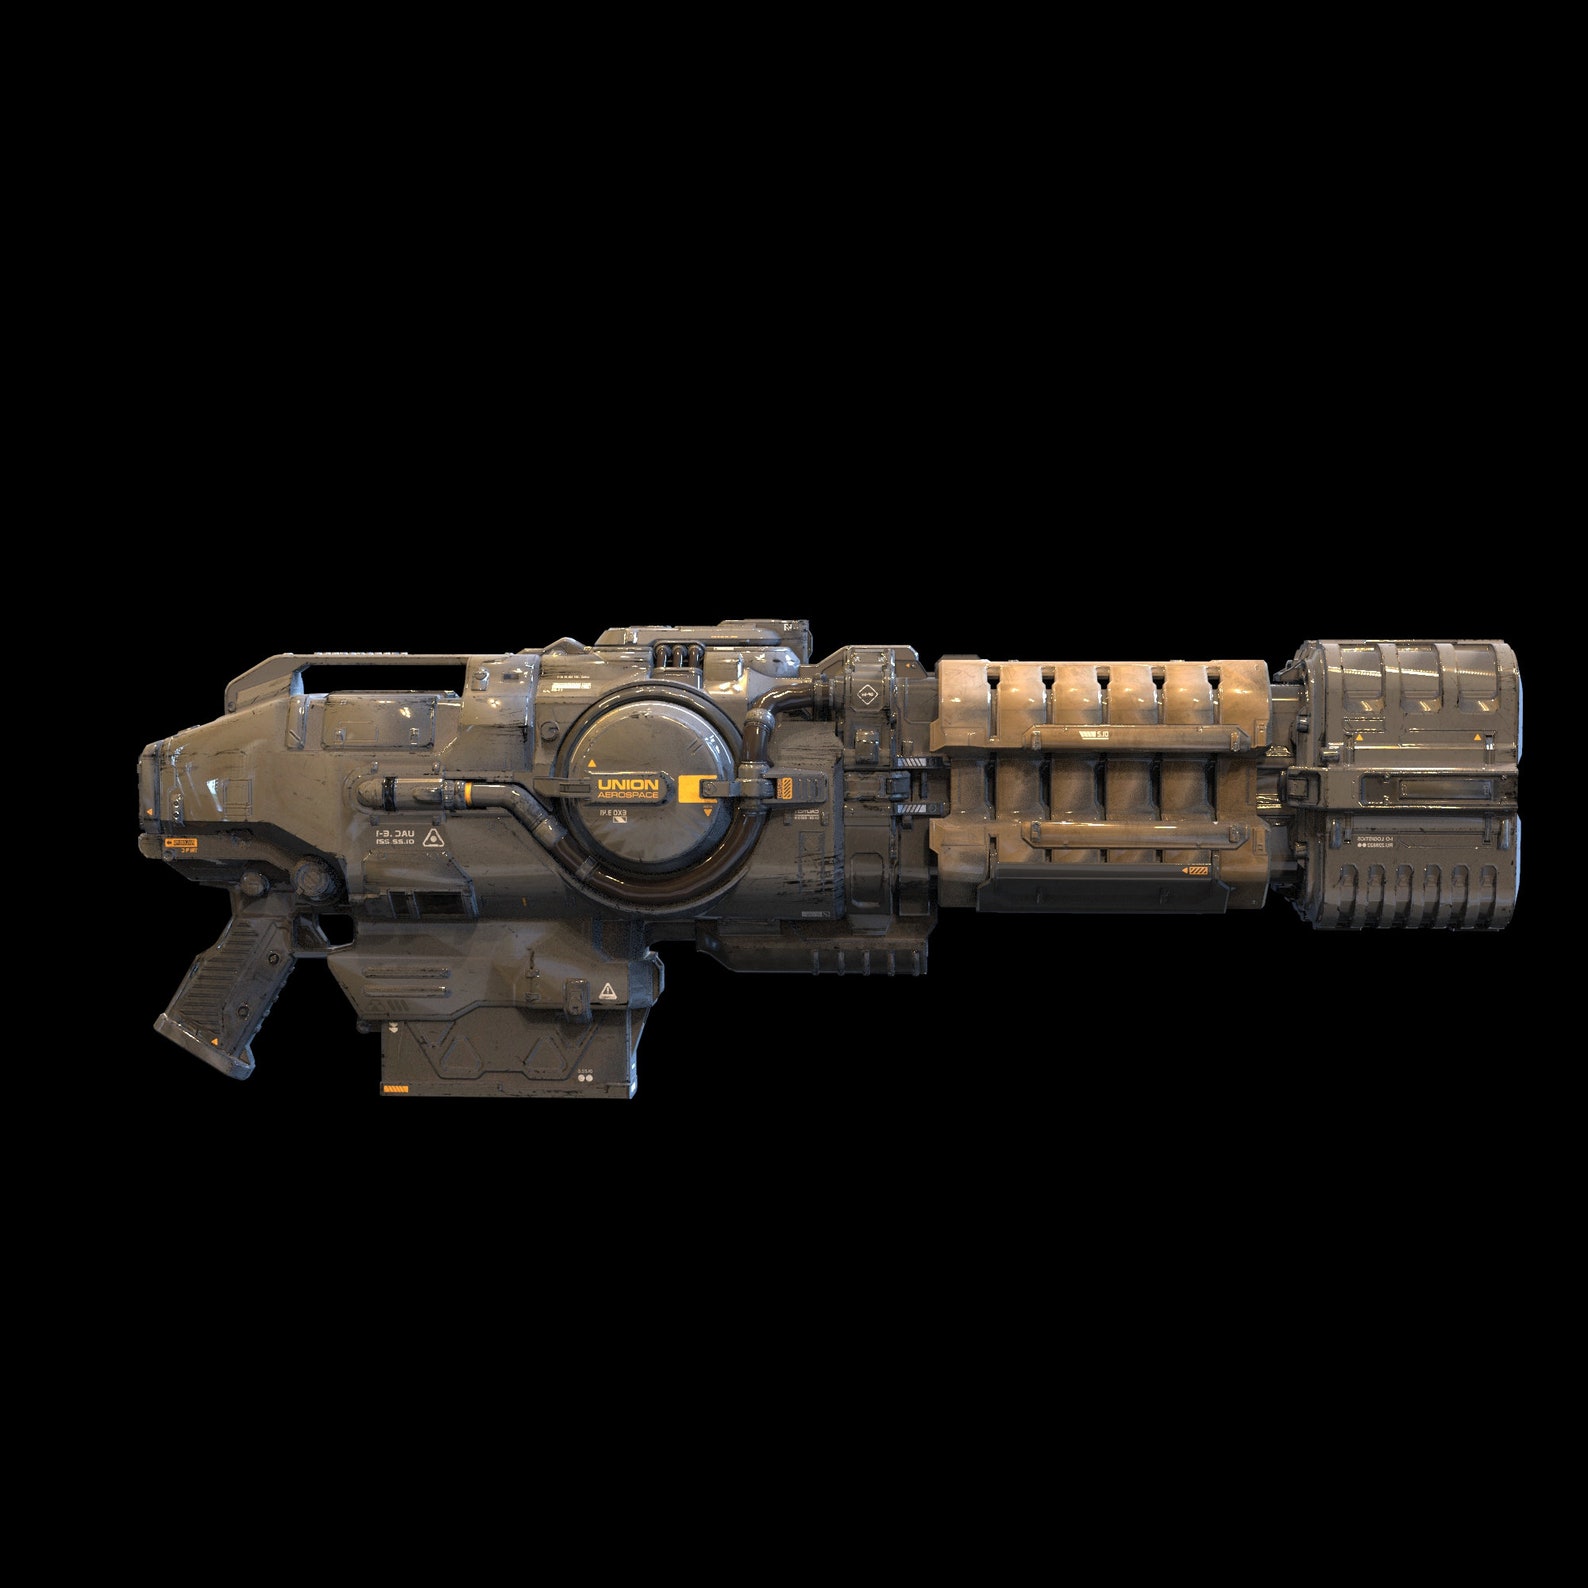 Fallout 4 doom weapons фото 116